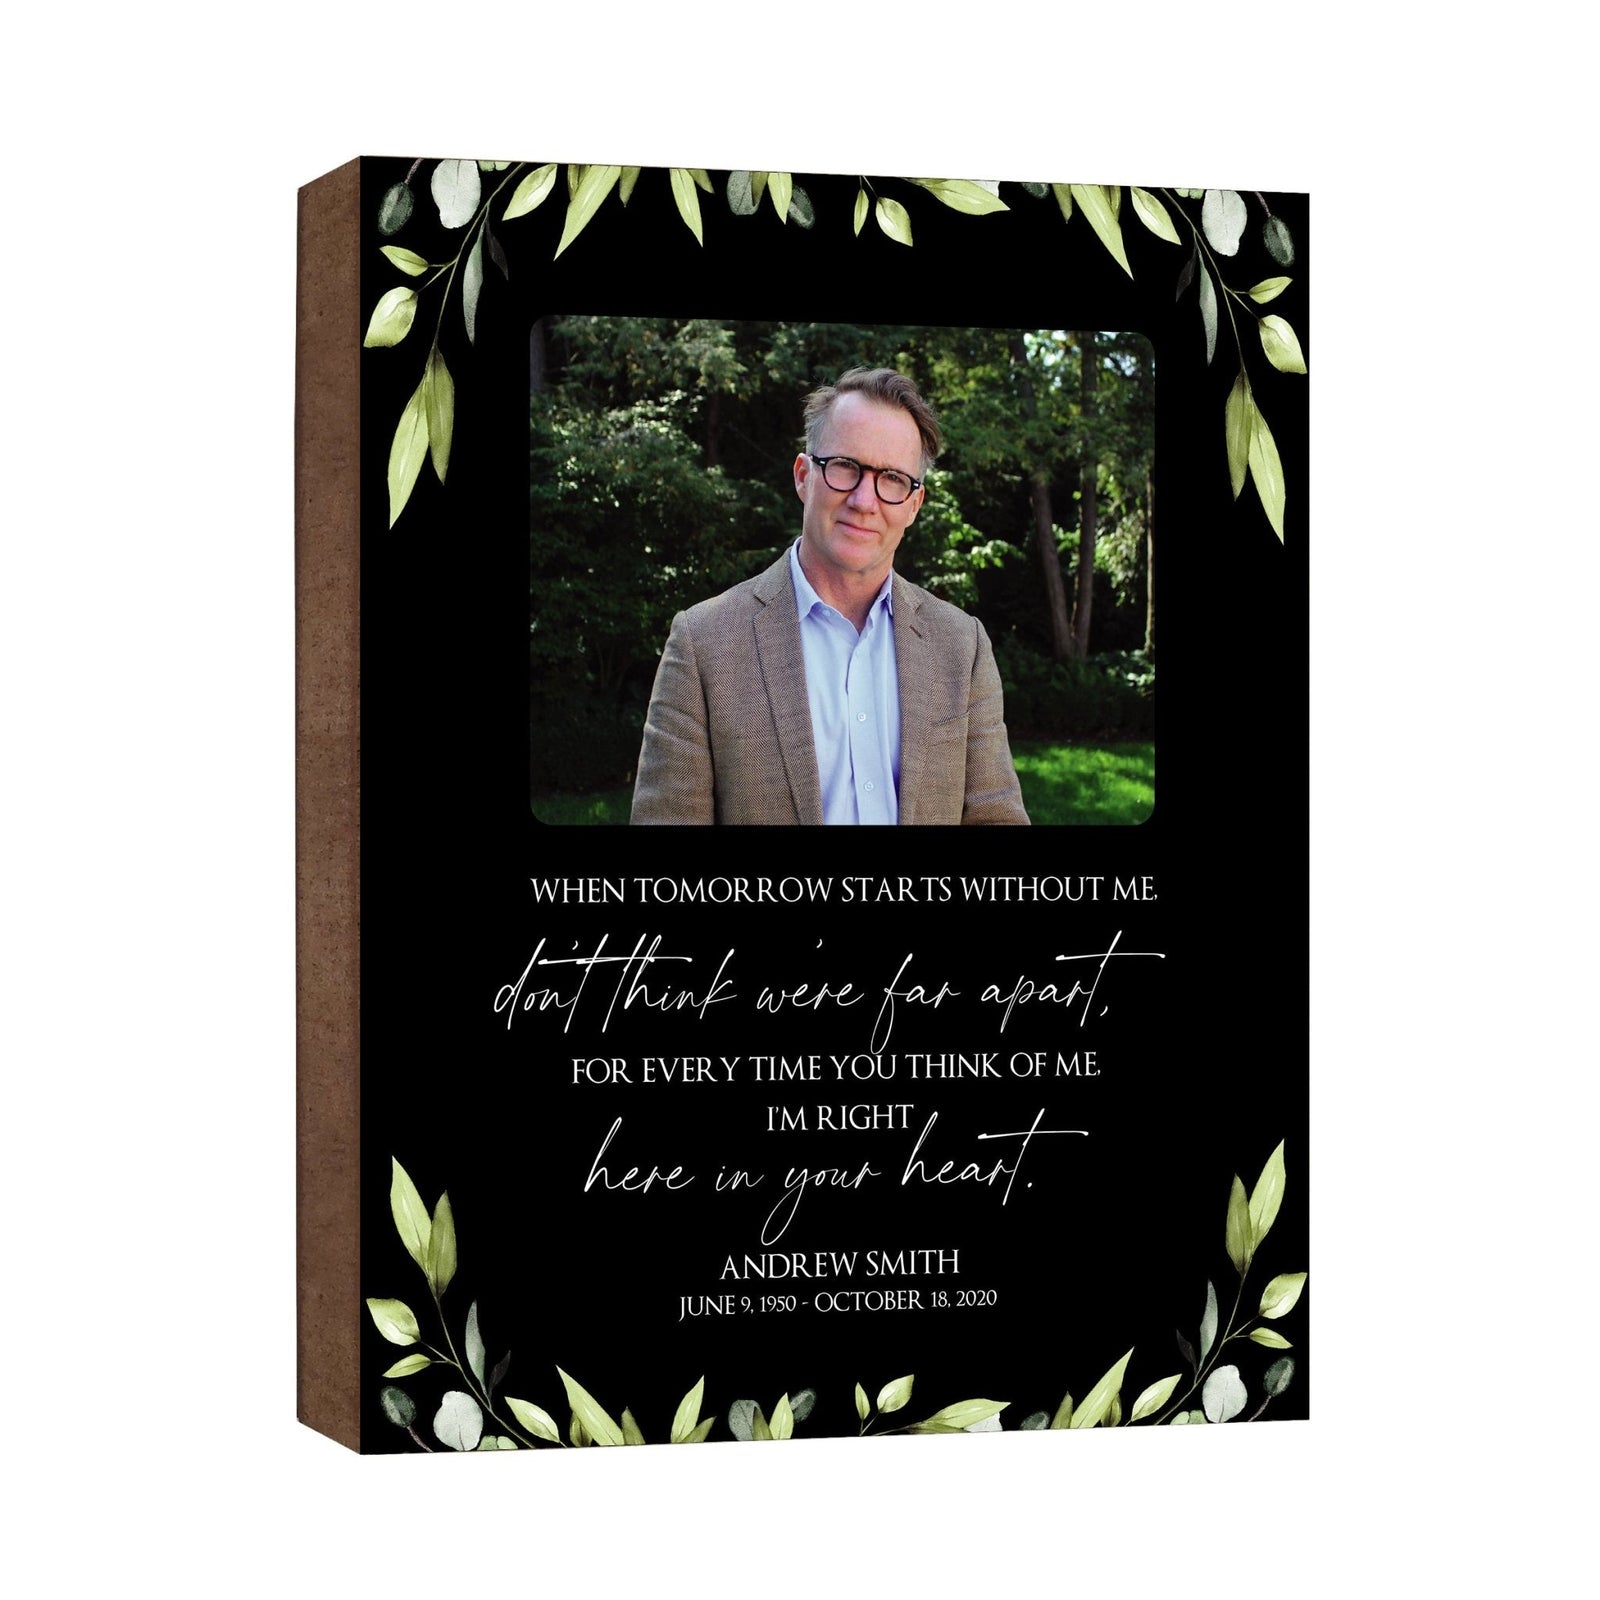 Personalized Human Memorial Black Photo & Inspirational Verse Bereavement Wall Décor & Sympathy Gift Ideas - When Tomorrow Starts - LifeSong Milestones